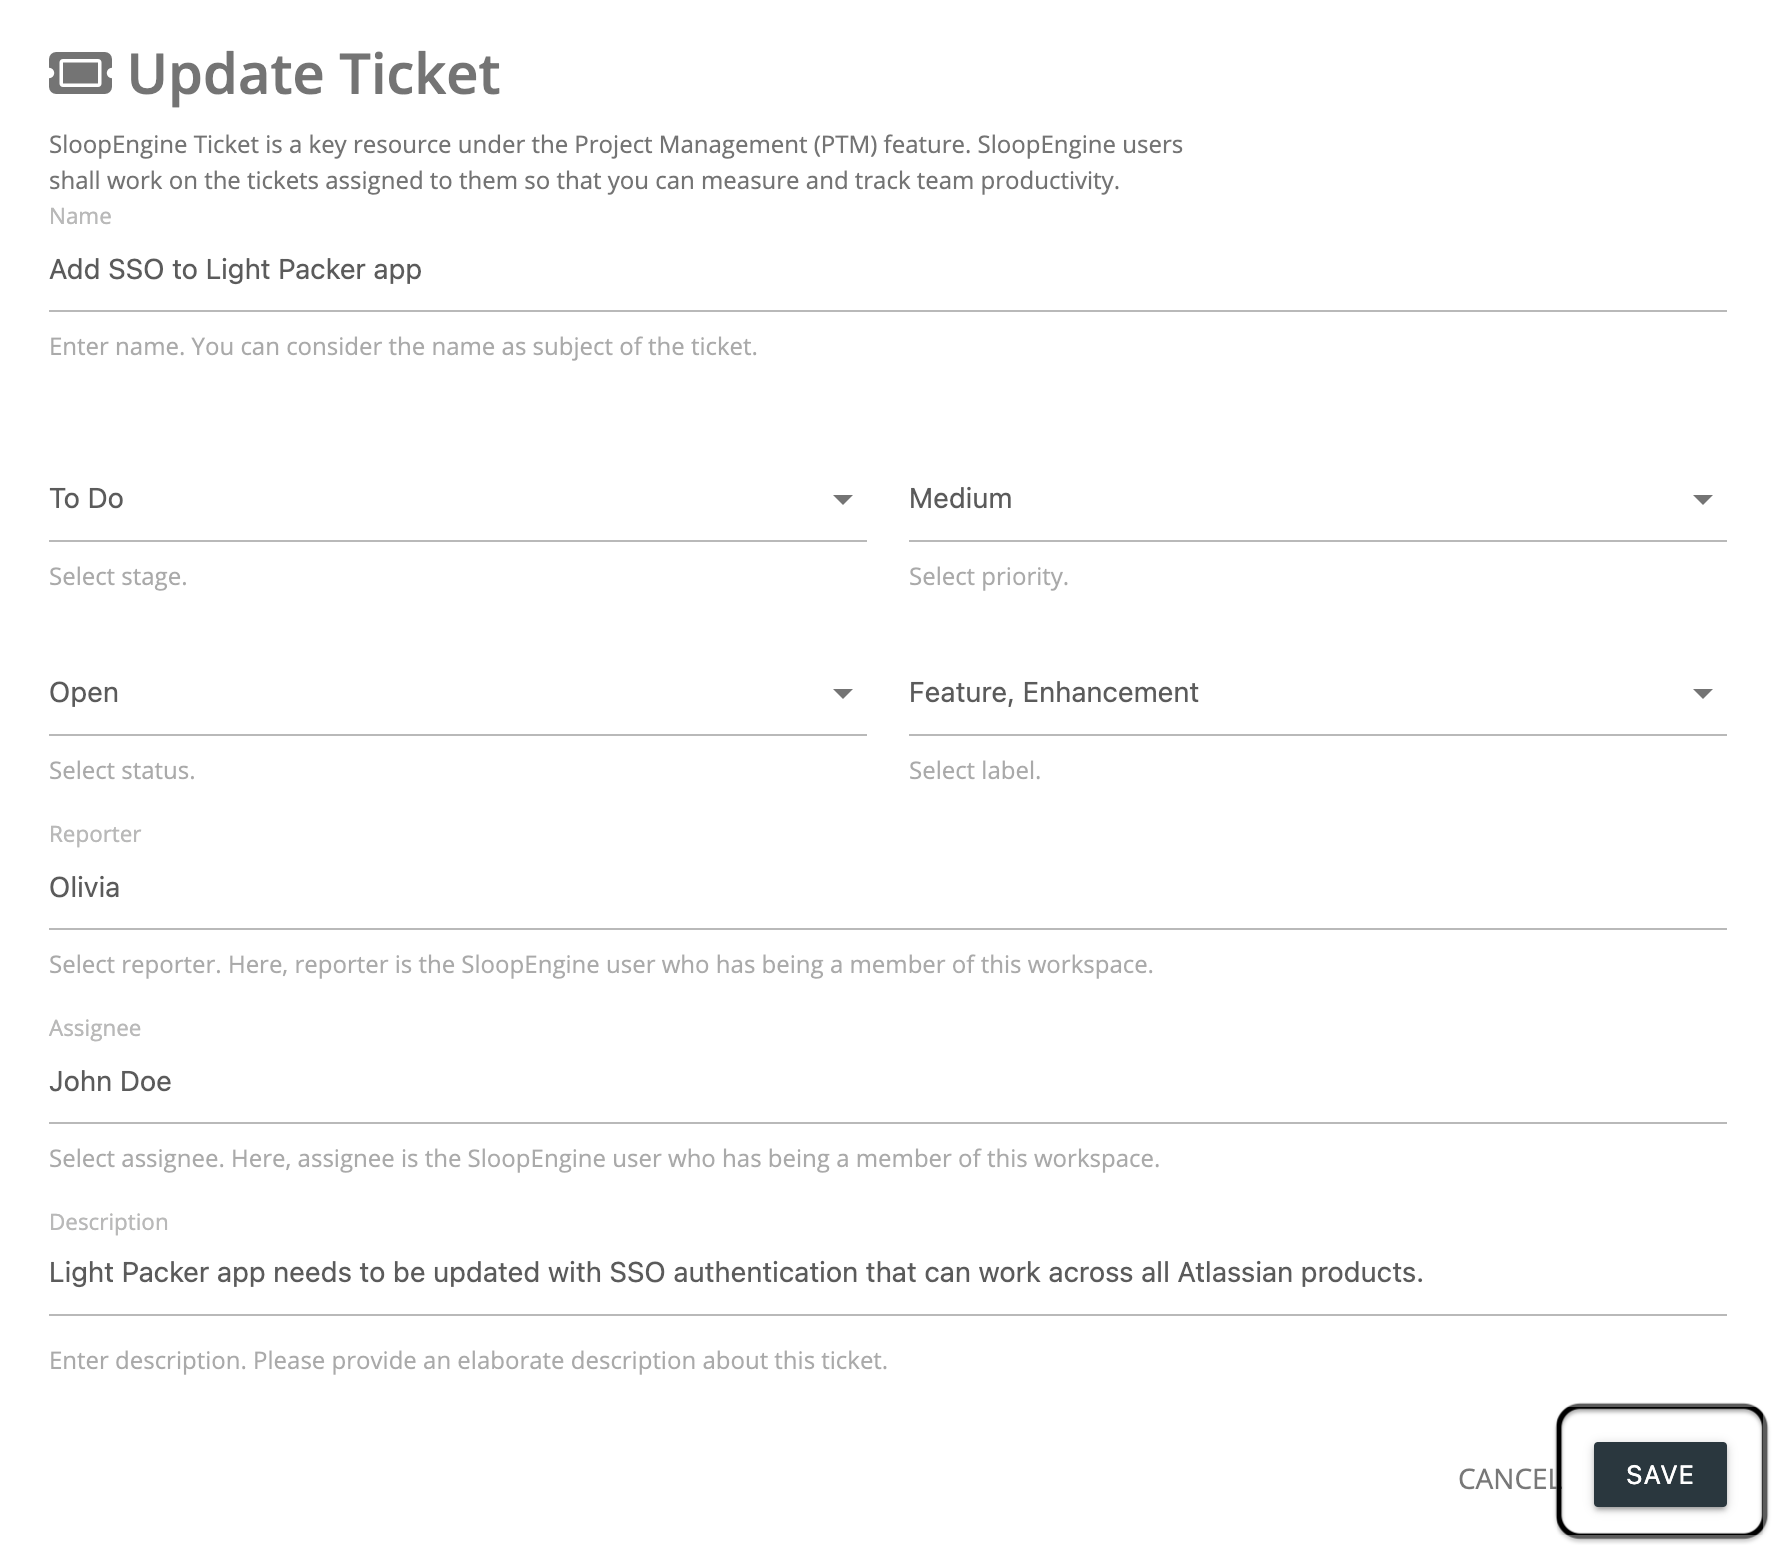 Screenshot of the ticket updation form with valid information.